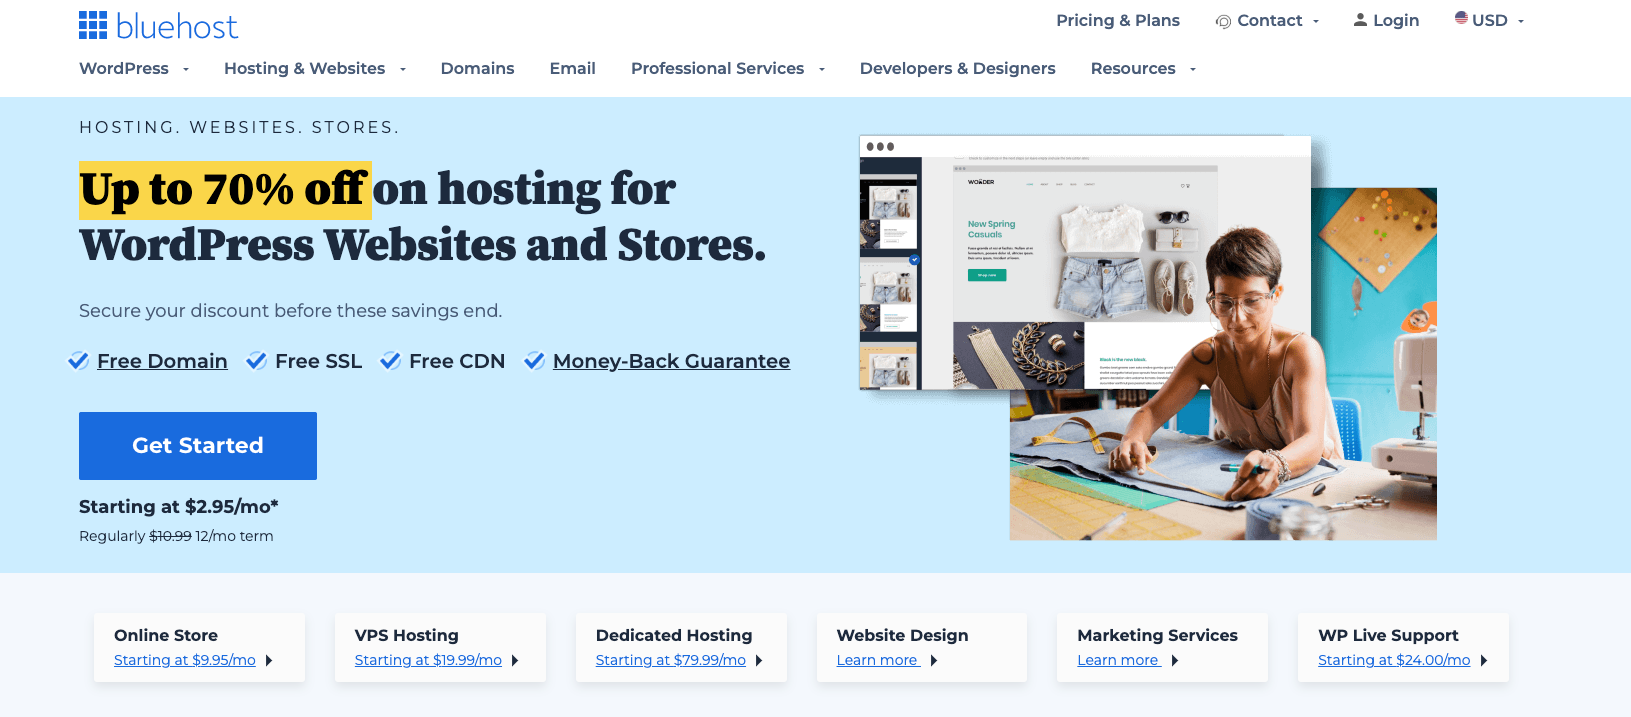 If you're looking for web hosting for ecommerce stores, Bluehost is another solid option